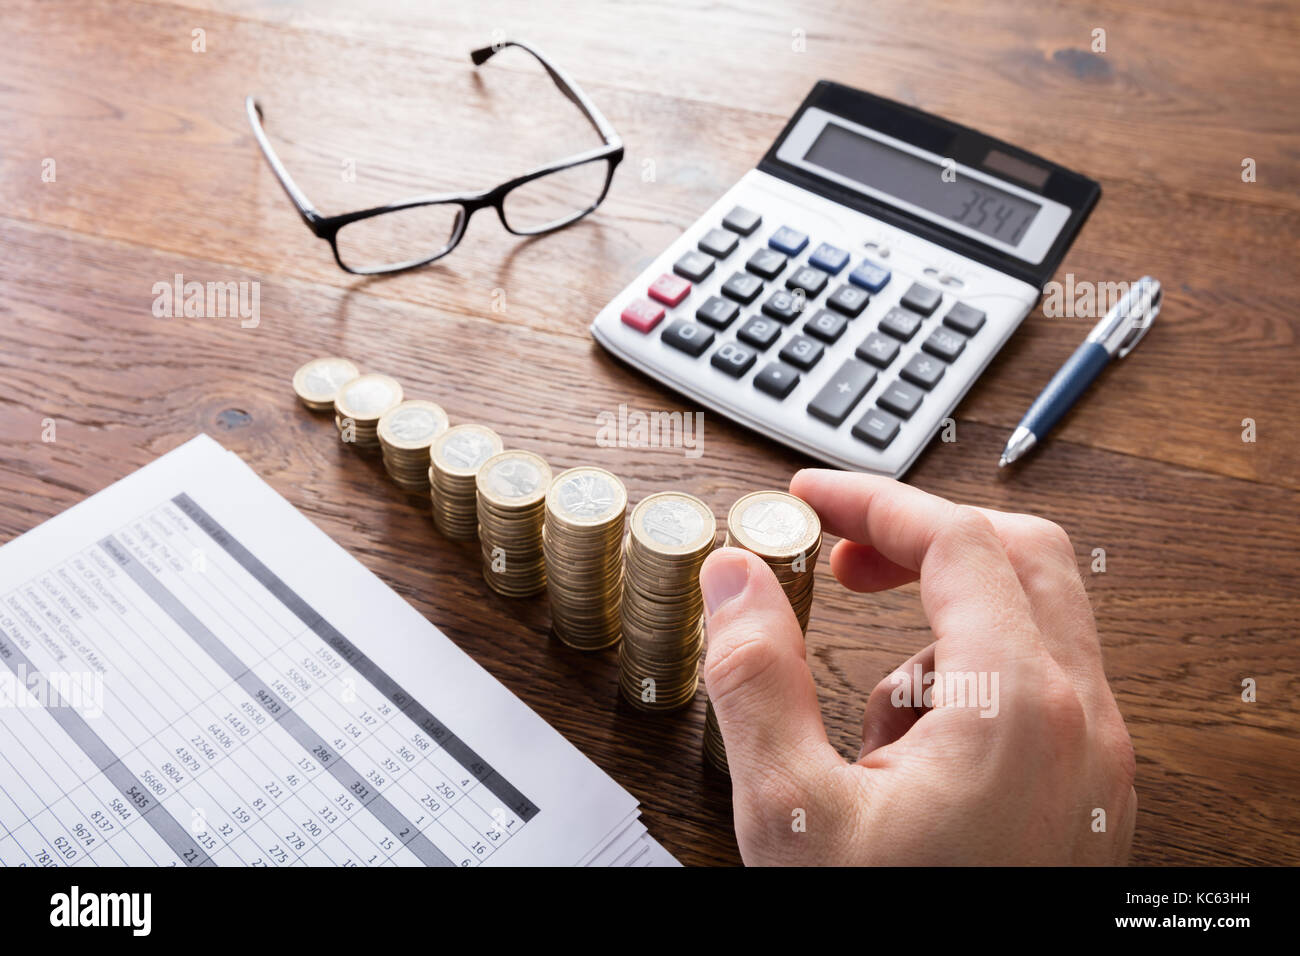 Person Stacking Coins With Calculator And Eyeglasses On Wooden Desk. Income Tax Rise Concept Stock Photo